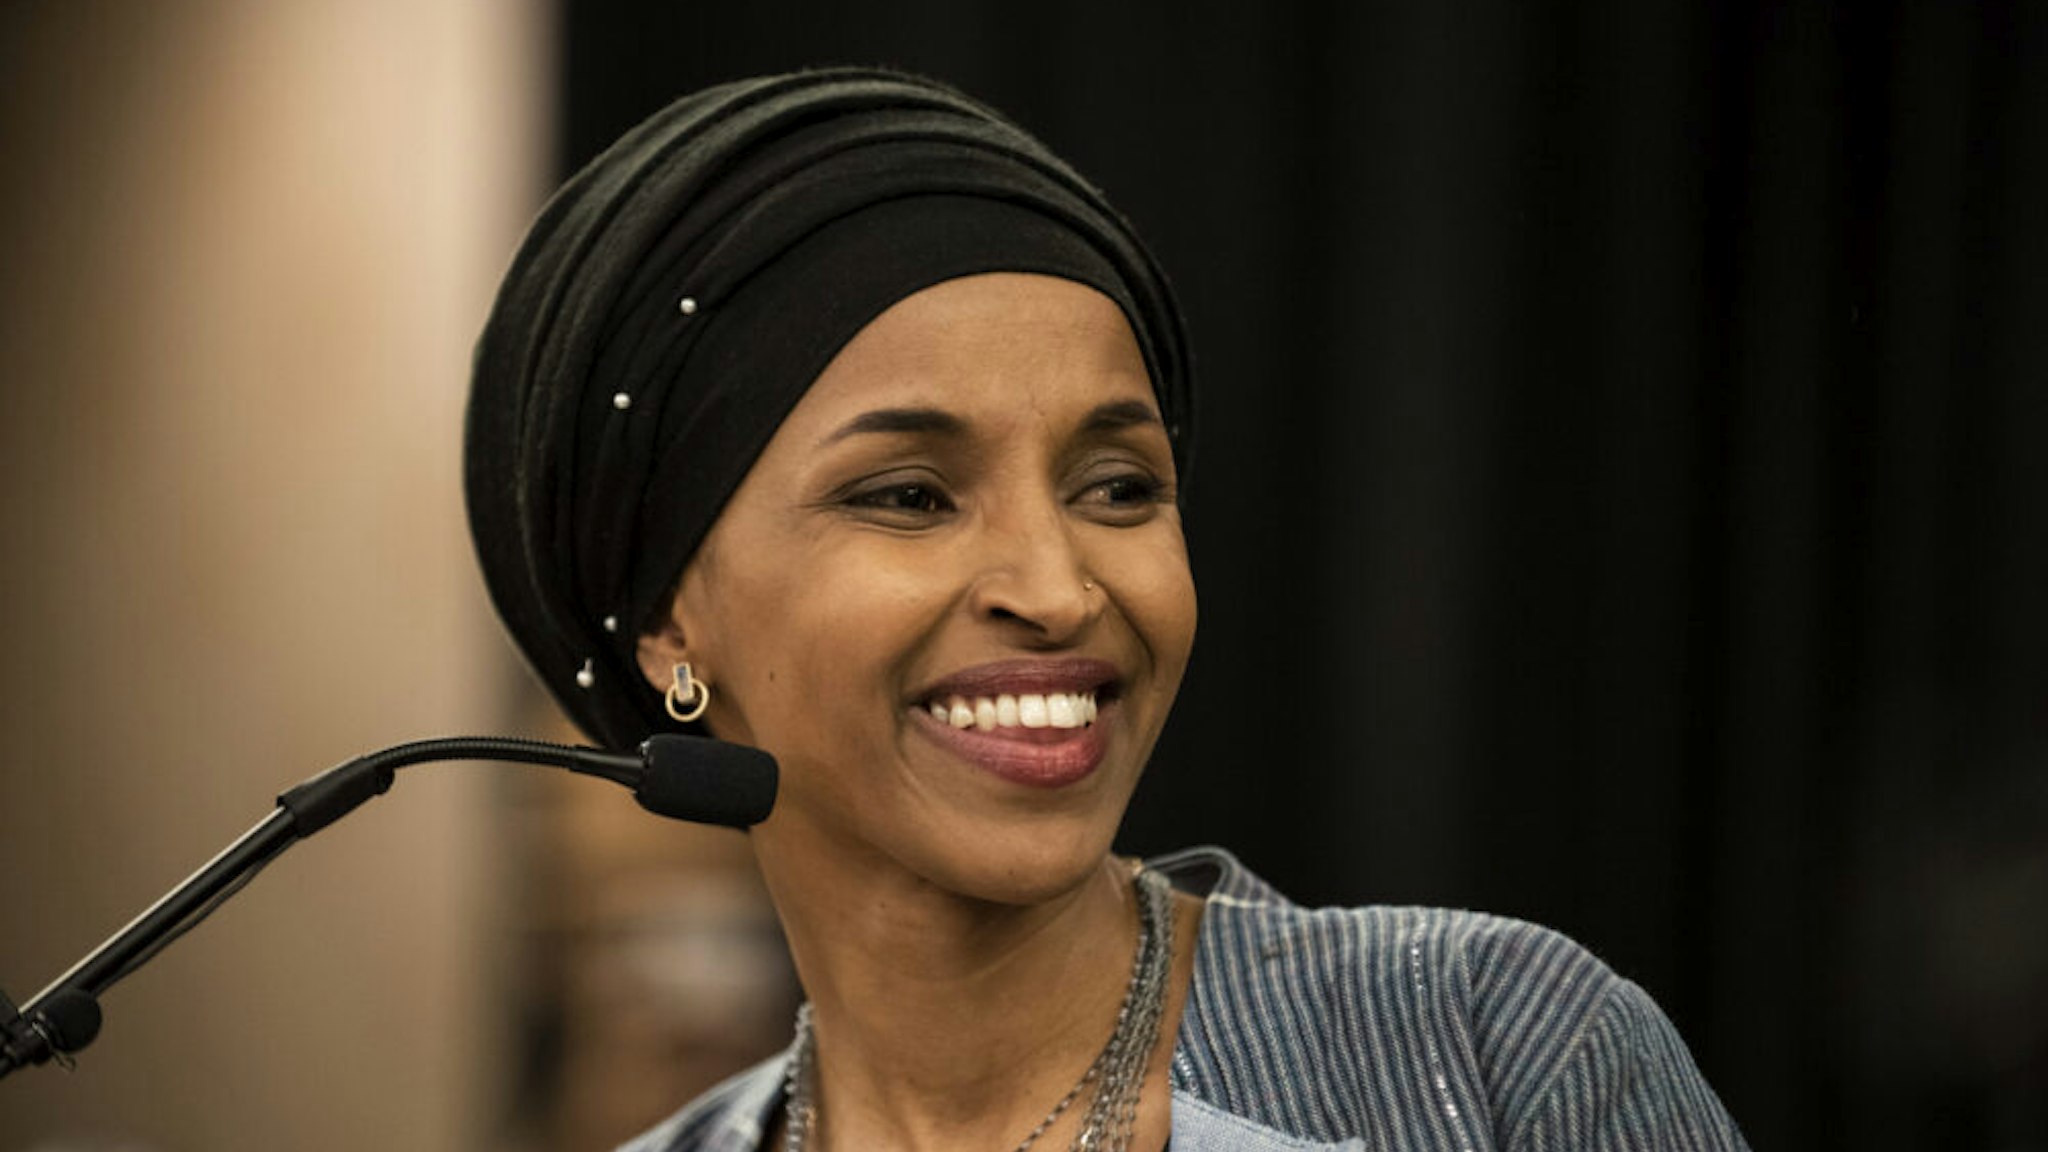 Minnesota Democratic Congressional Candidate Ilhan Omar speaks at an election night results party on November 6, 2018 in Minneapolis, Minnesota. Omar won the race for Minnesota's 5th congressional district seat against Republican candidate Jennifer Zielinski to become one of the first Muslim women elected to Congress.